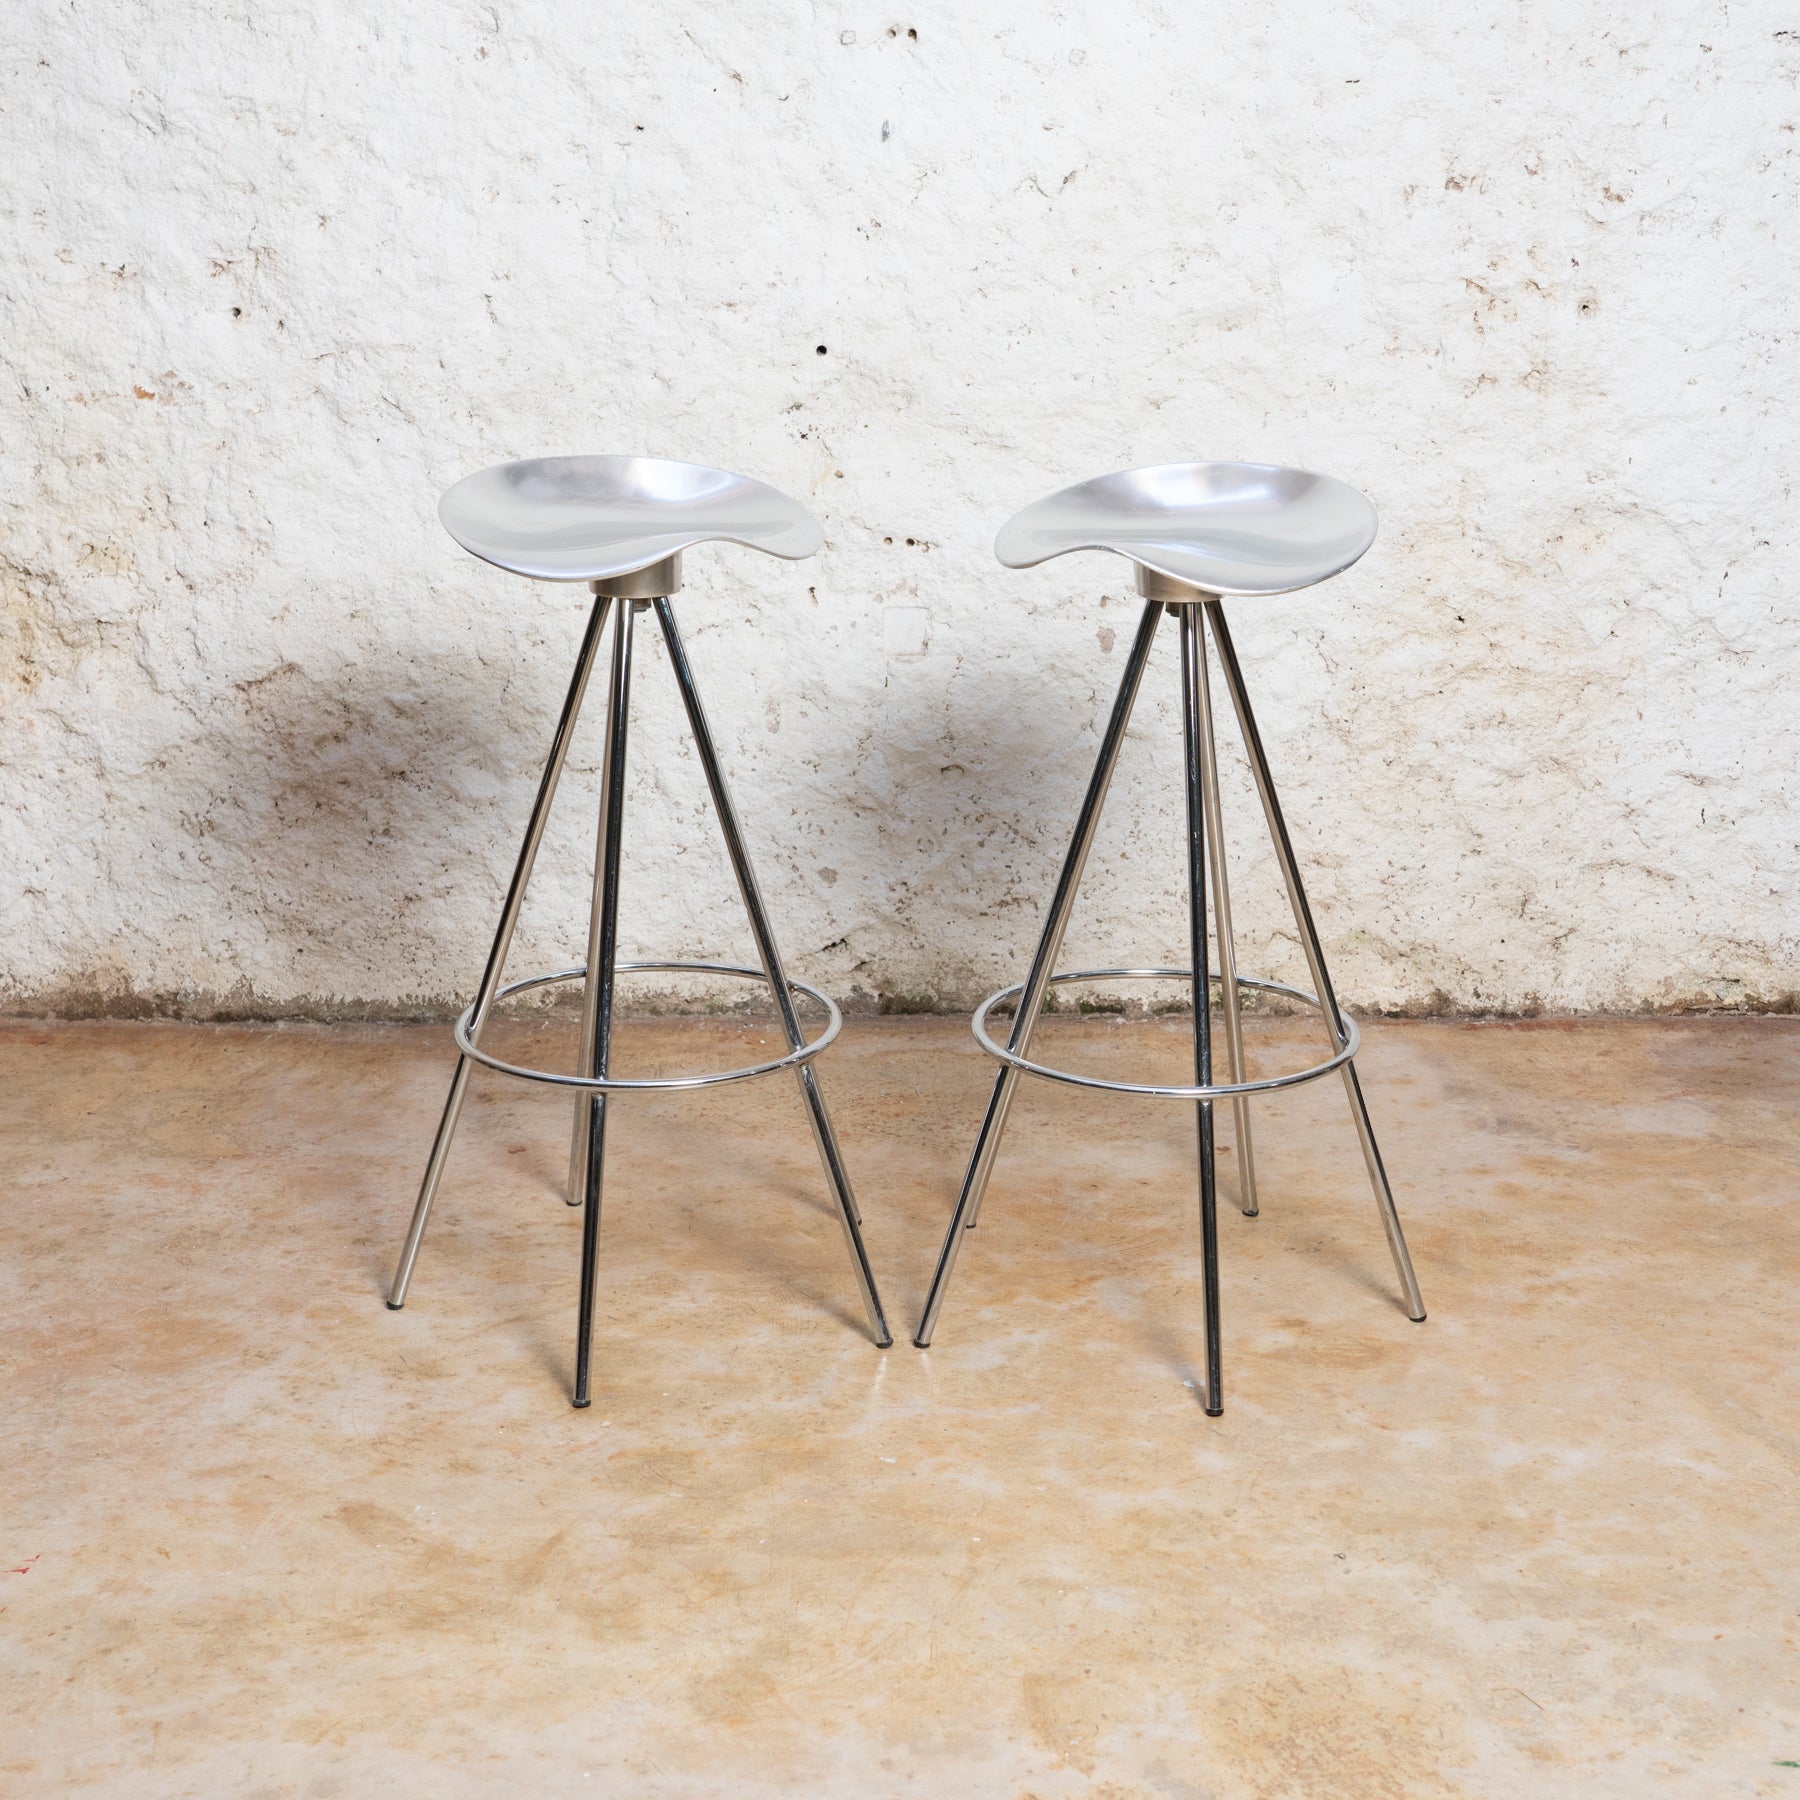 Jamaica stool designed by Pepe Cortes.
Manufactured by Amat Barcelona 

The Jamaica stool is already a Classic in Spanish design and is one of the best designed stools in all history. It’s been on the market for over 25 years and remains as